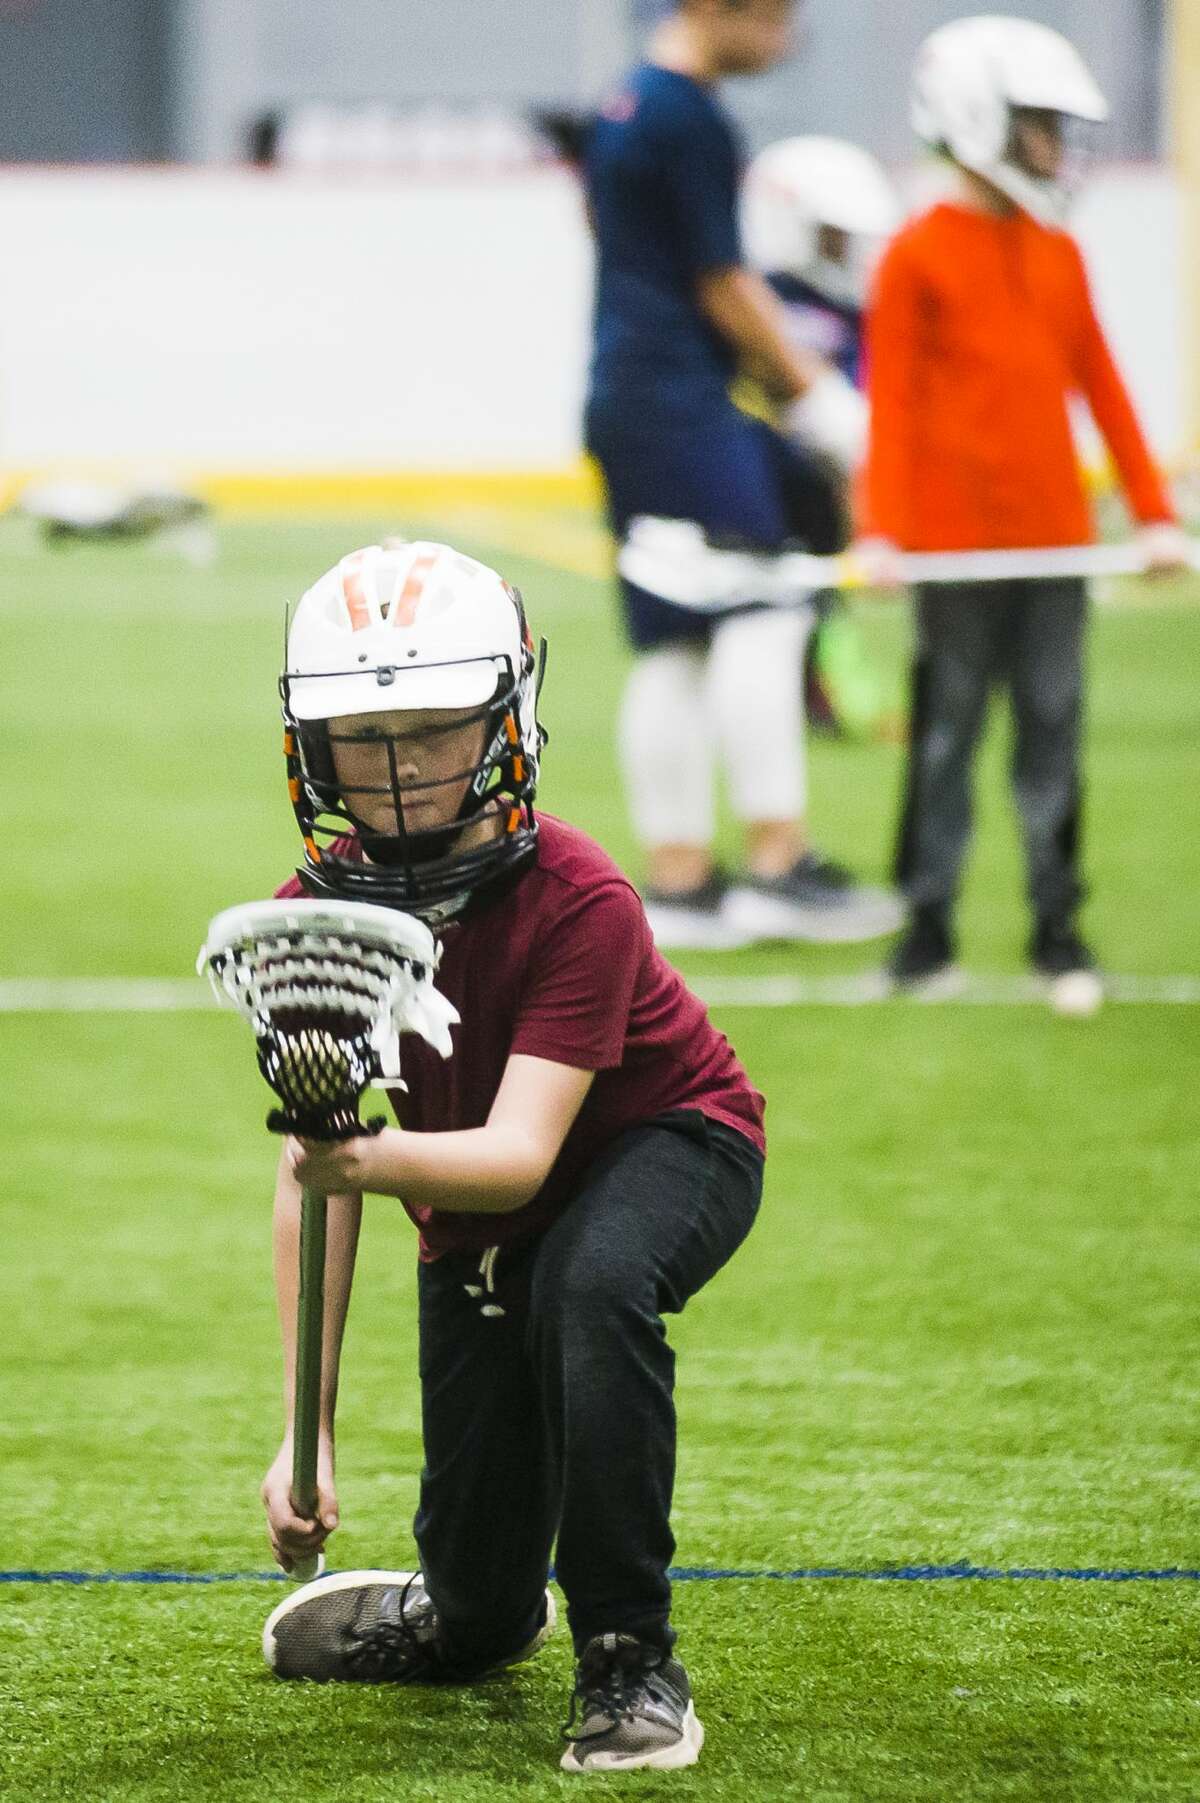 Trevor Shuart of Freeland, 9, practices scooping the ball during a "Try Lacrosse Free" event hosted by the Midland Lacrosse Club on Saturday, Dec. 15, 2018 at Midland Civic Arena. (Katy Kildee/kkildee@mdn.net)